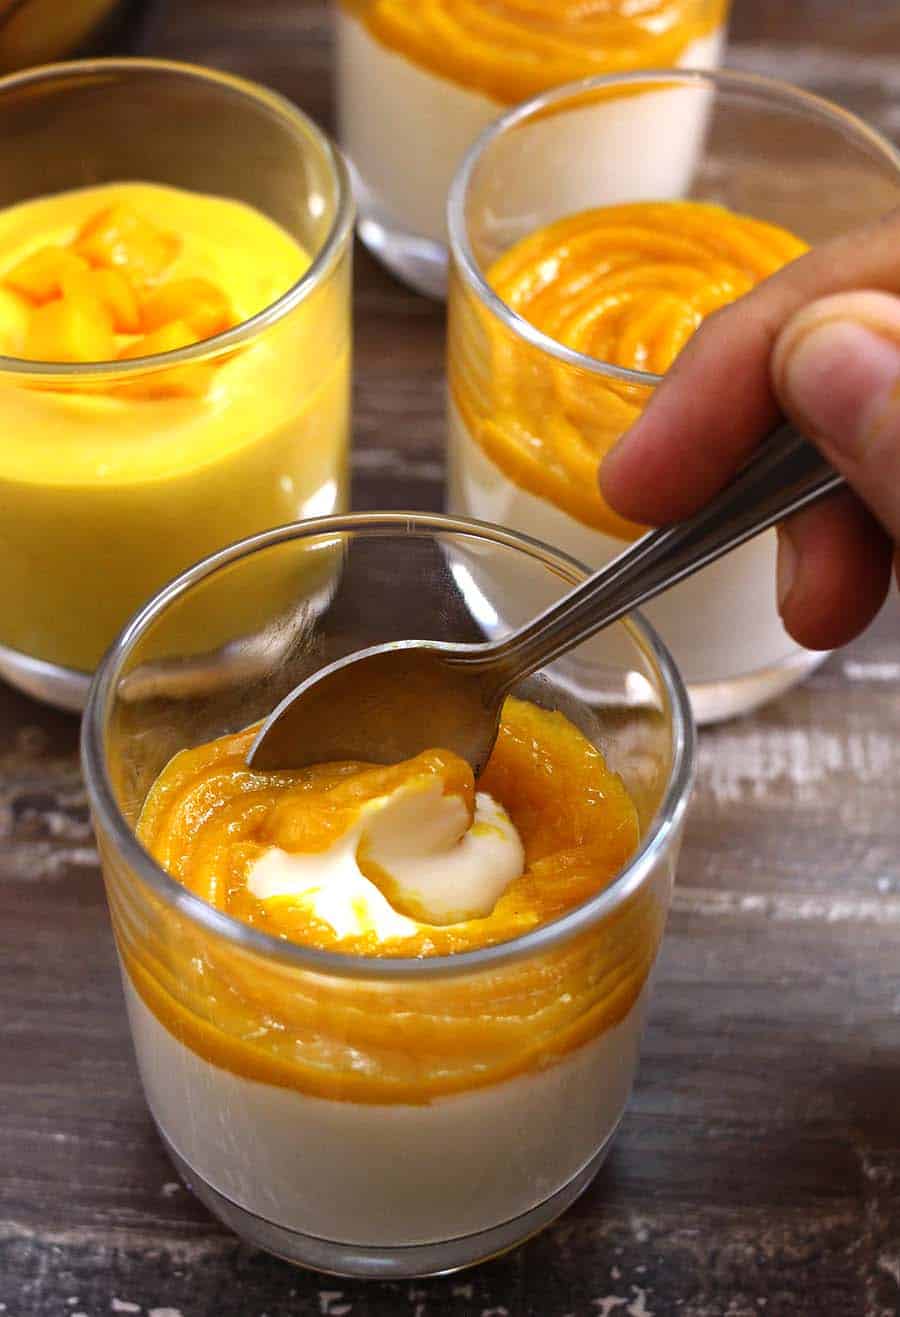 Easy Mango White Chocolate Mousse or Mousse Au Chocolat Mangue, Make ahead dessert recipe for parties, get together, romantic date, july 4th, memorial day, Easter, thanksgiving, Christmas, mango recipes, chocolate recipes, summer food recipe, no bake desserts, eggless sweets and desserts, pudding recipes, cream cheese, keto mousse